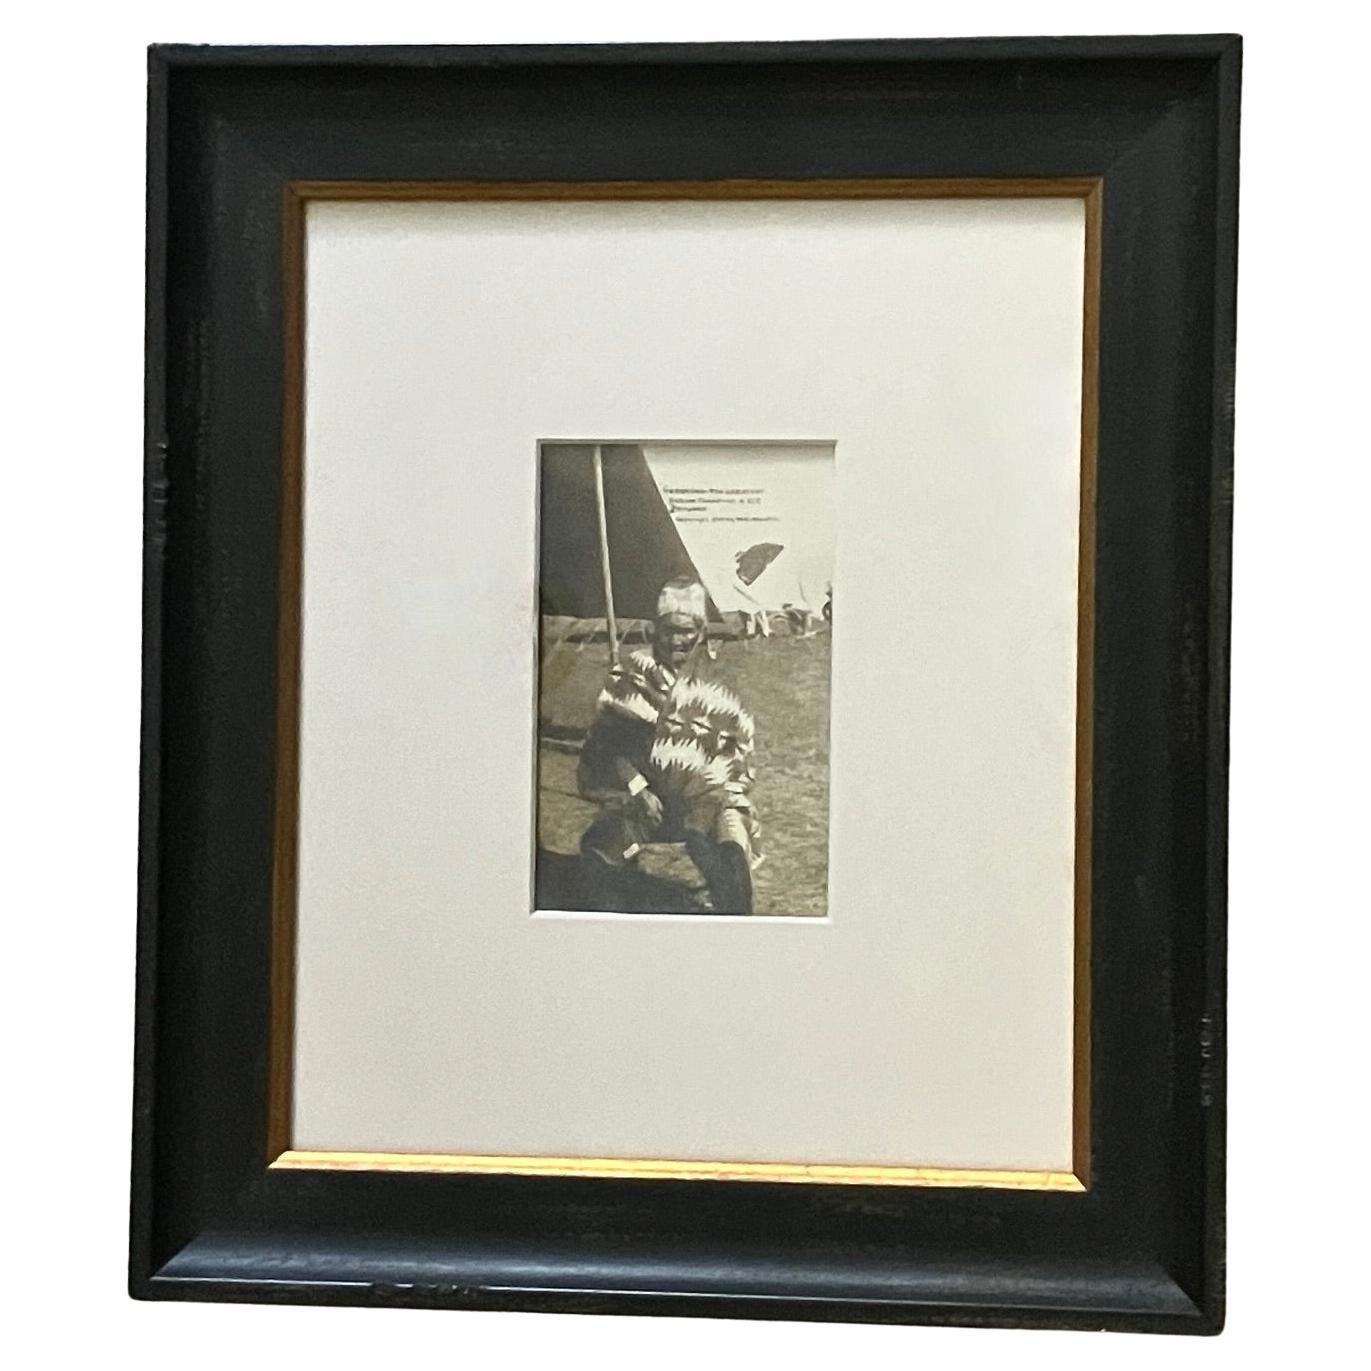 Early 20th Century Postcard with Framed Photograph of Geronimo Postmarked 1911